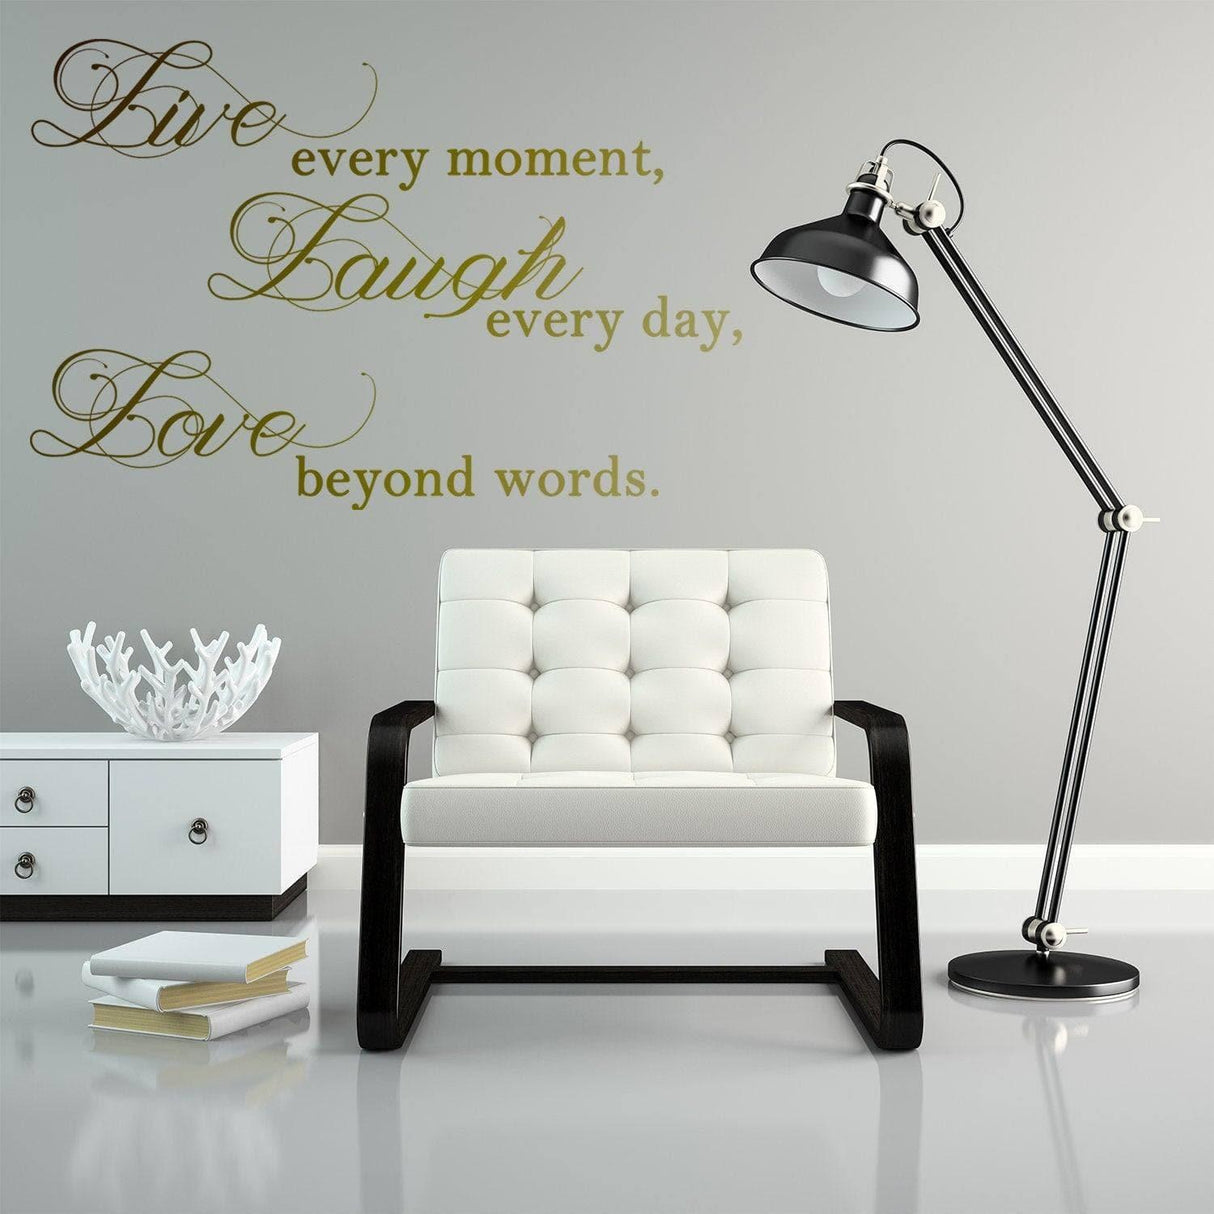 Wall Sticker VINYL WALL ART DECAL Family Wall Quote Bedroom Wall